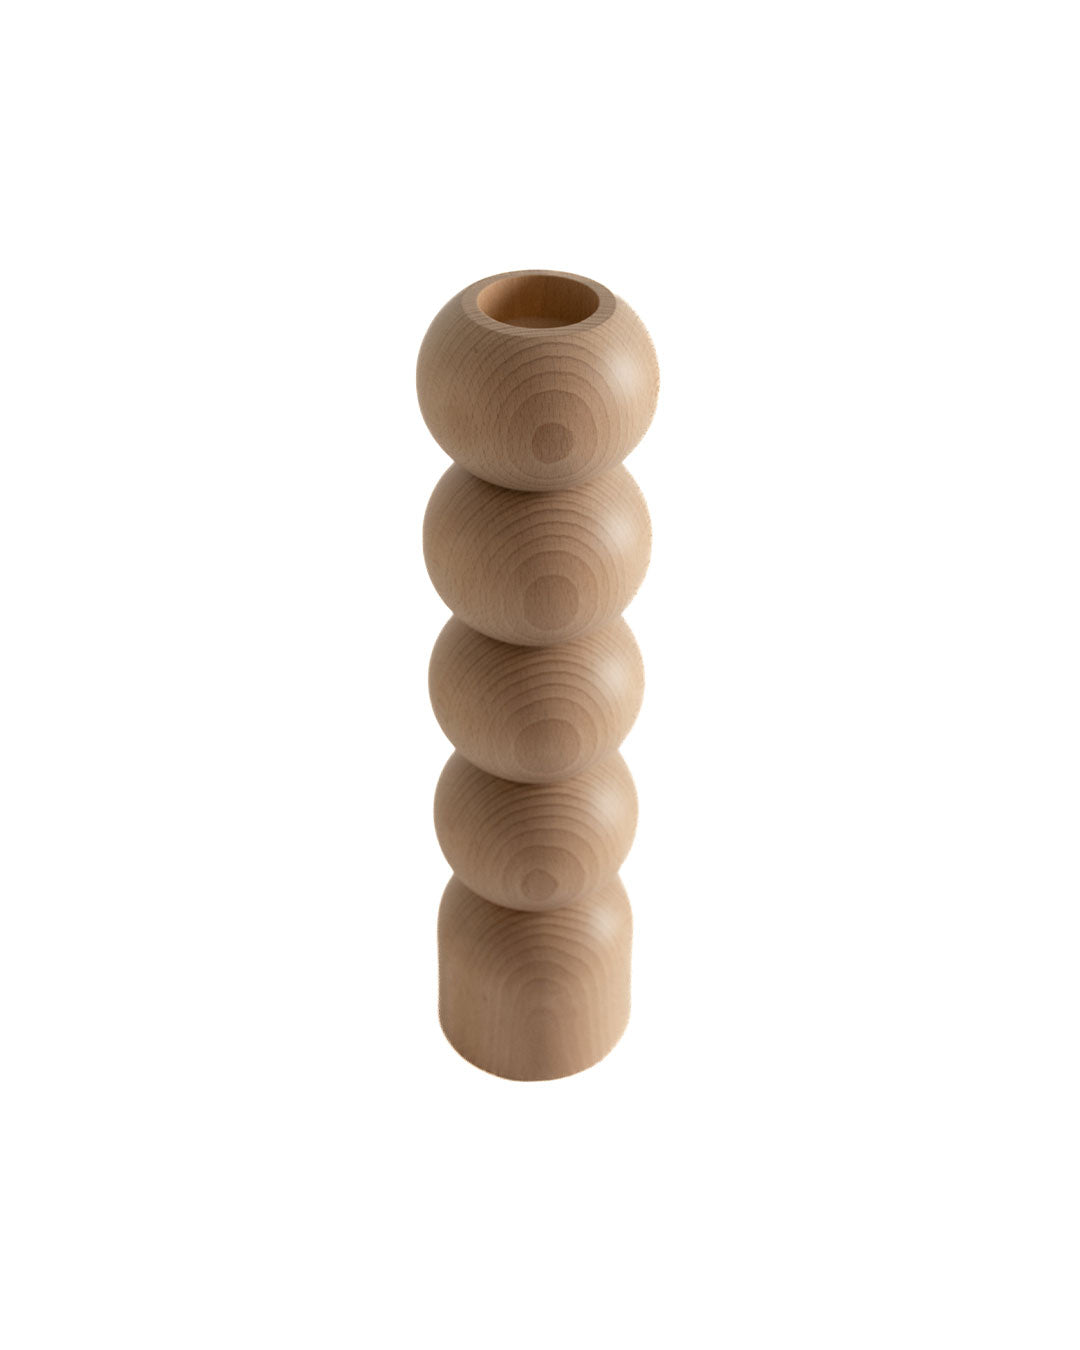 Candleholder-3-in-1-high natural top